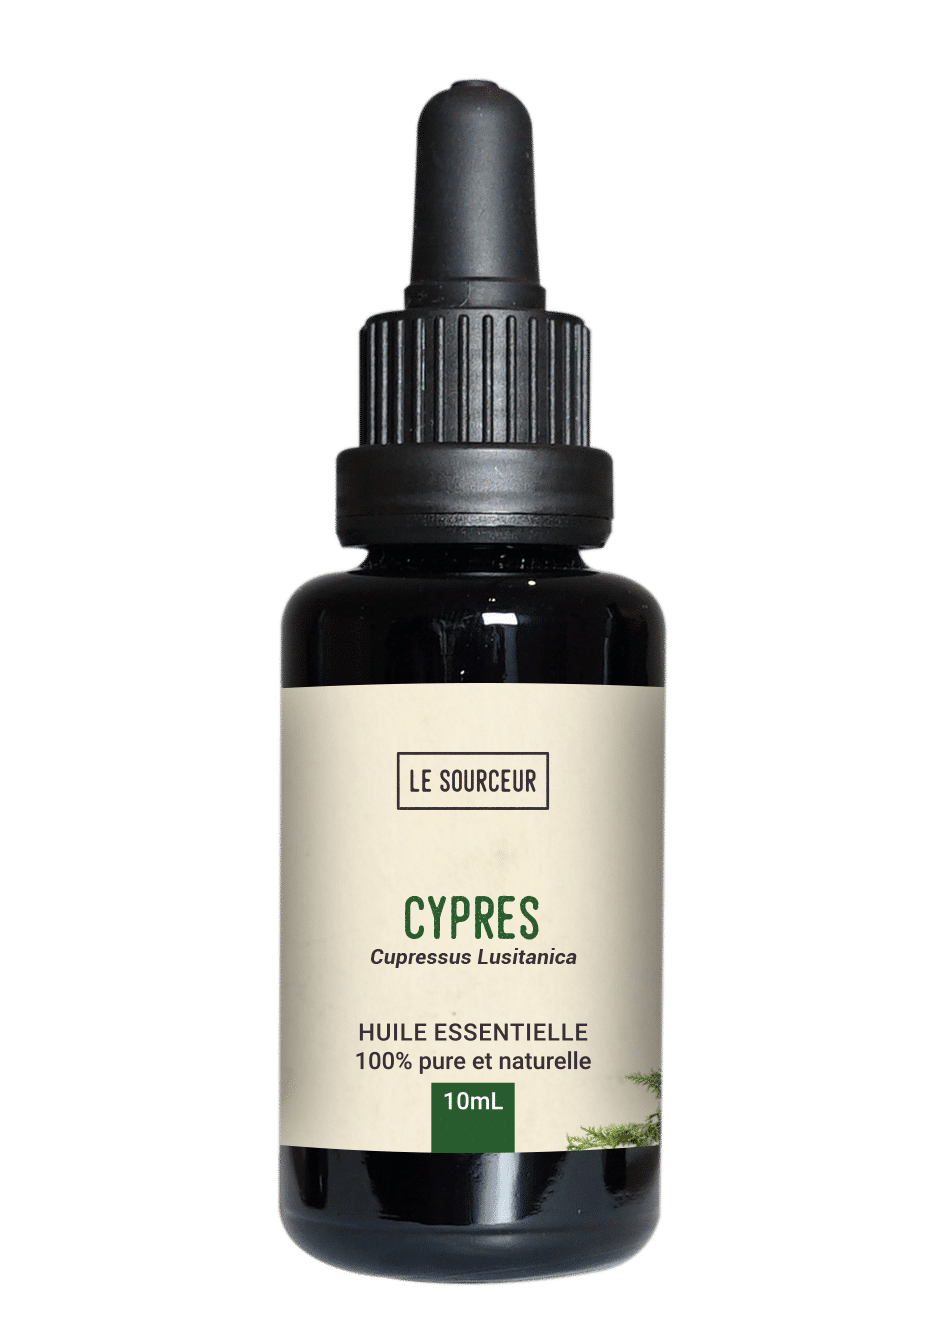 Bottle of essential oil of Cypress